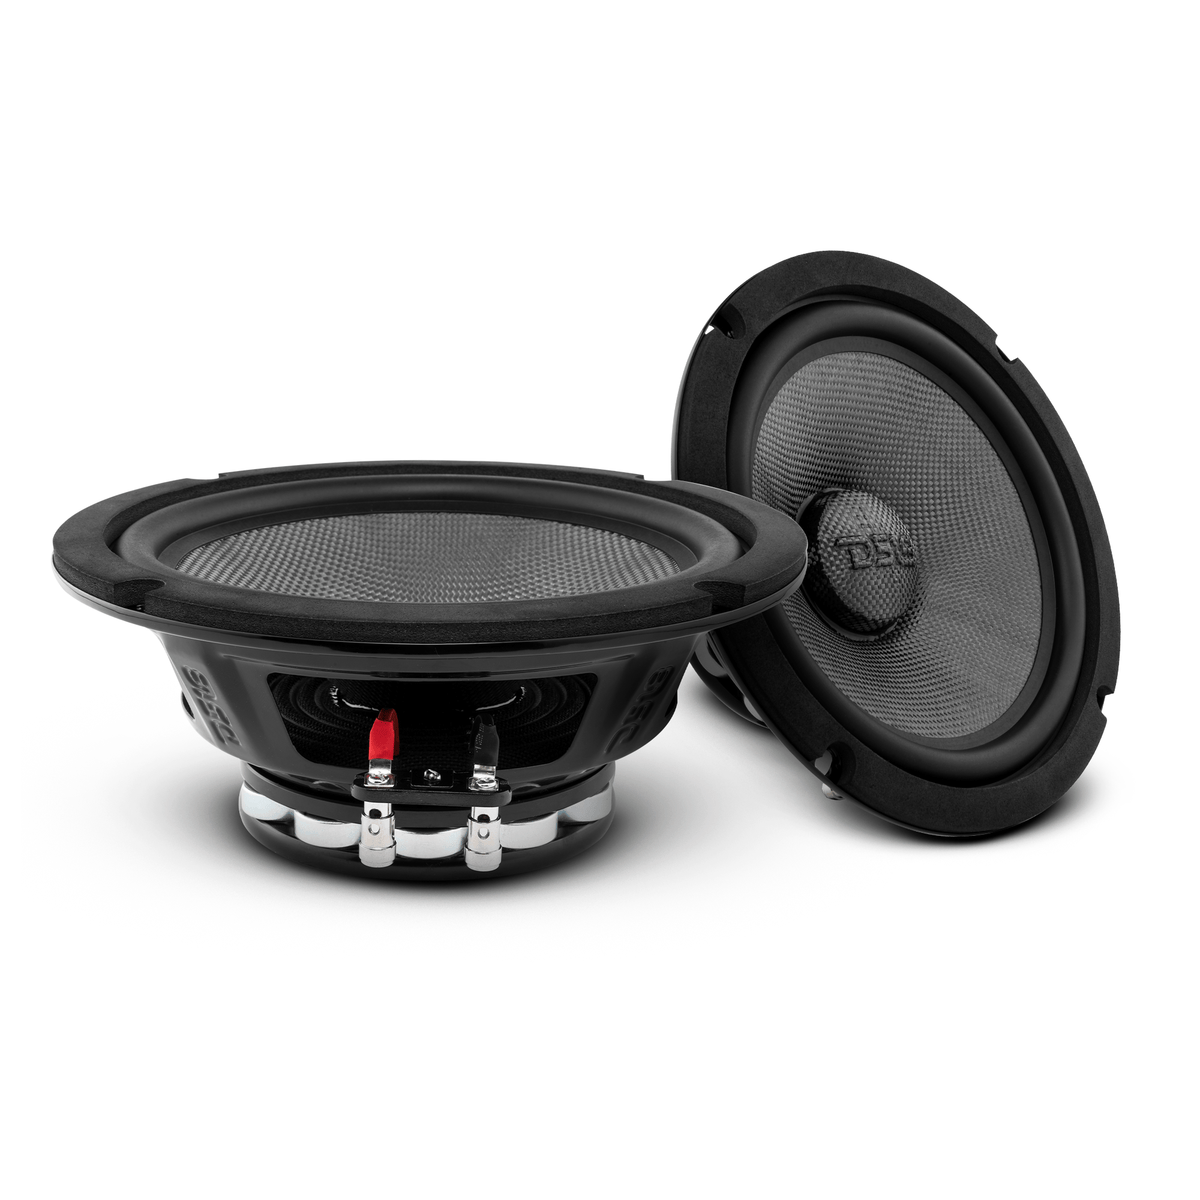 DS18 PRO-CF8.4NR 8" Mid-Bass Loudspeaker With Water Resistant Carbon Fiber Cone And Neodymium Rings Magnet 600 Watts 4-Ohms